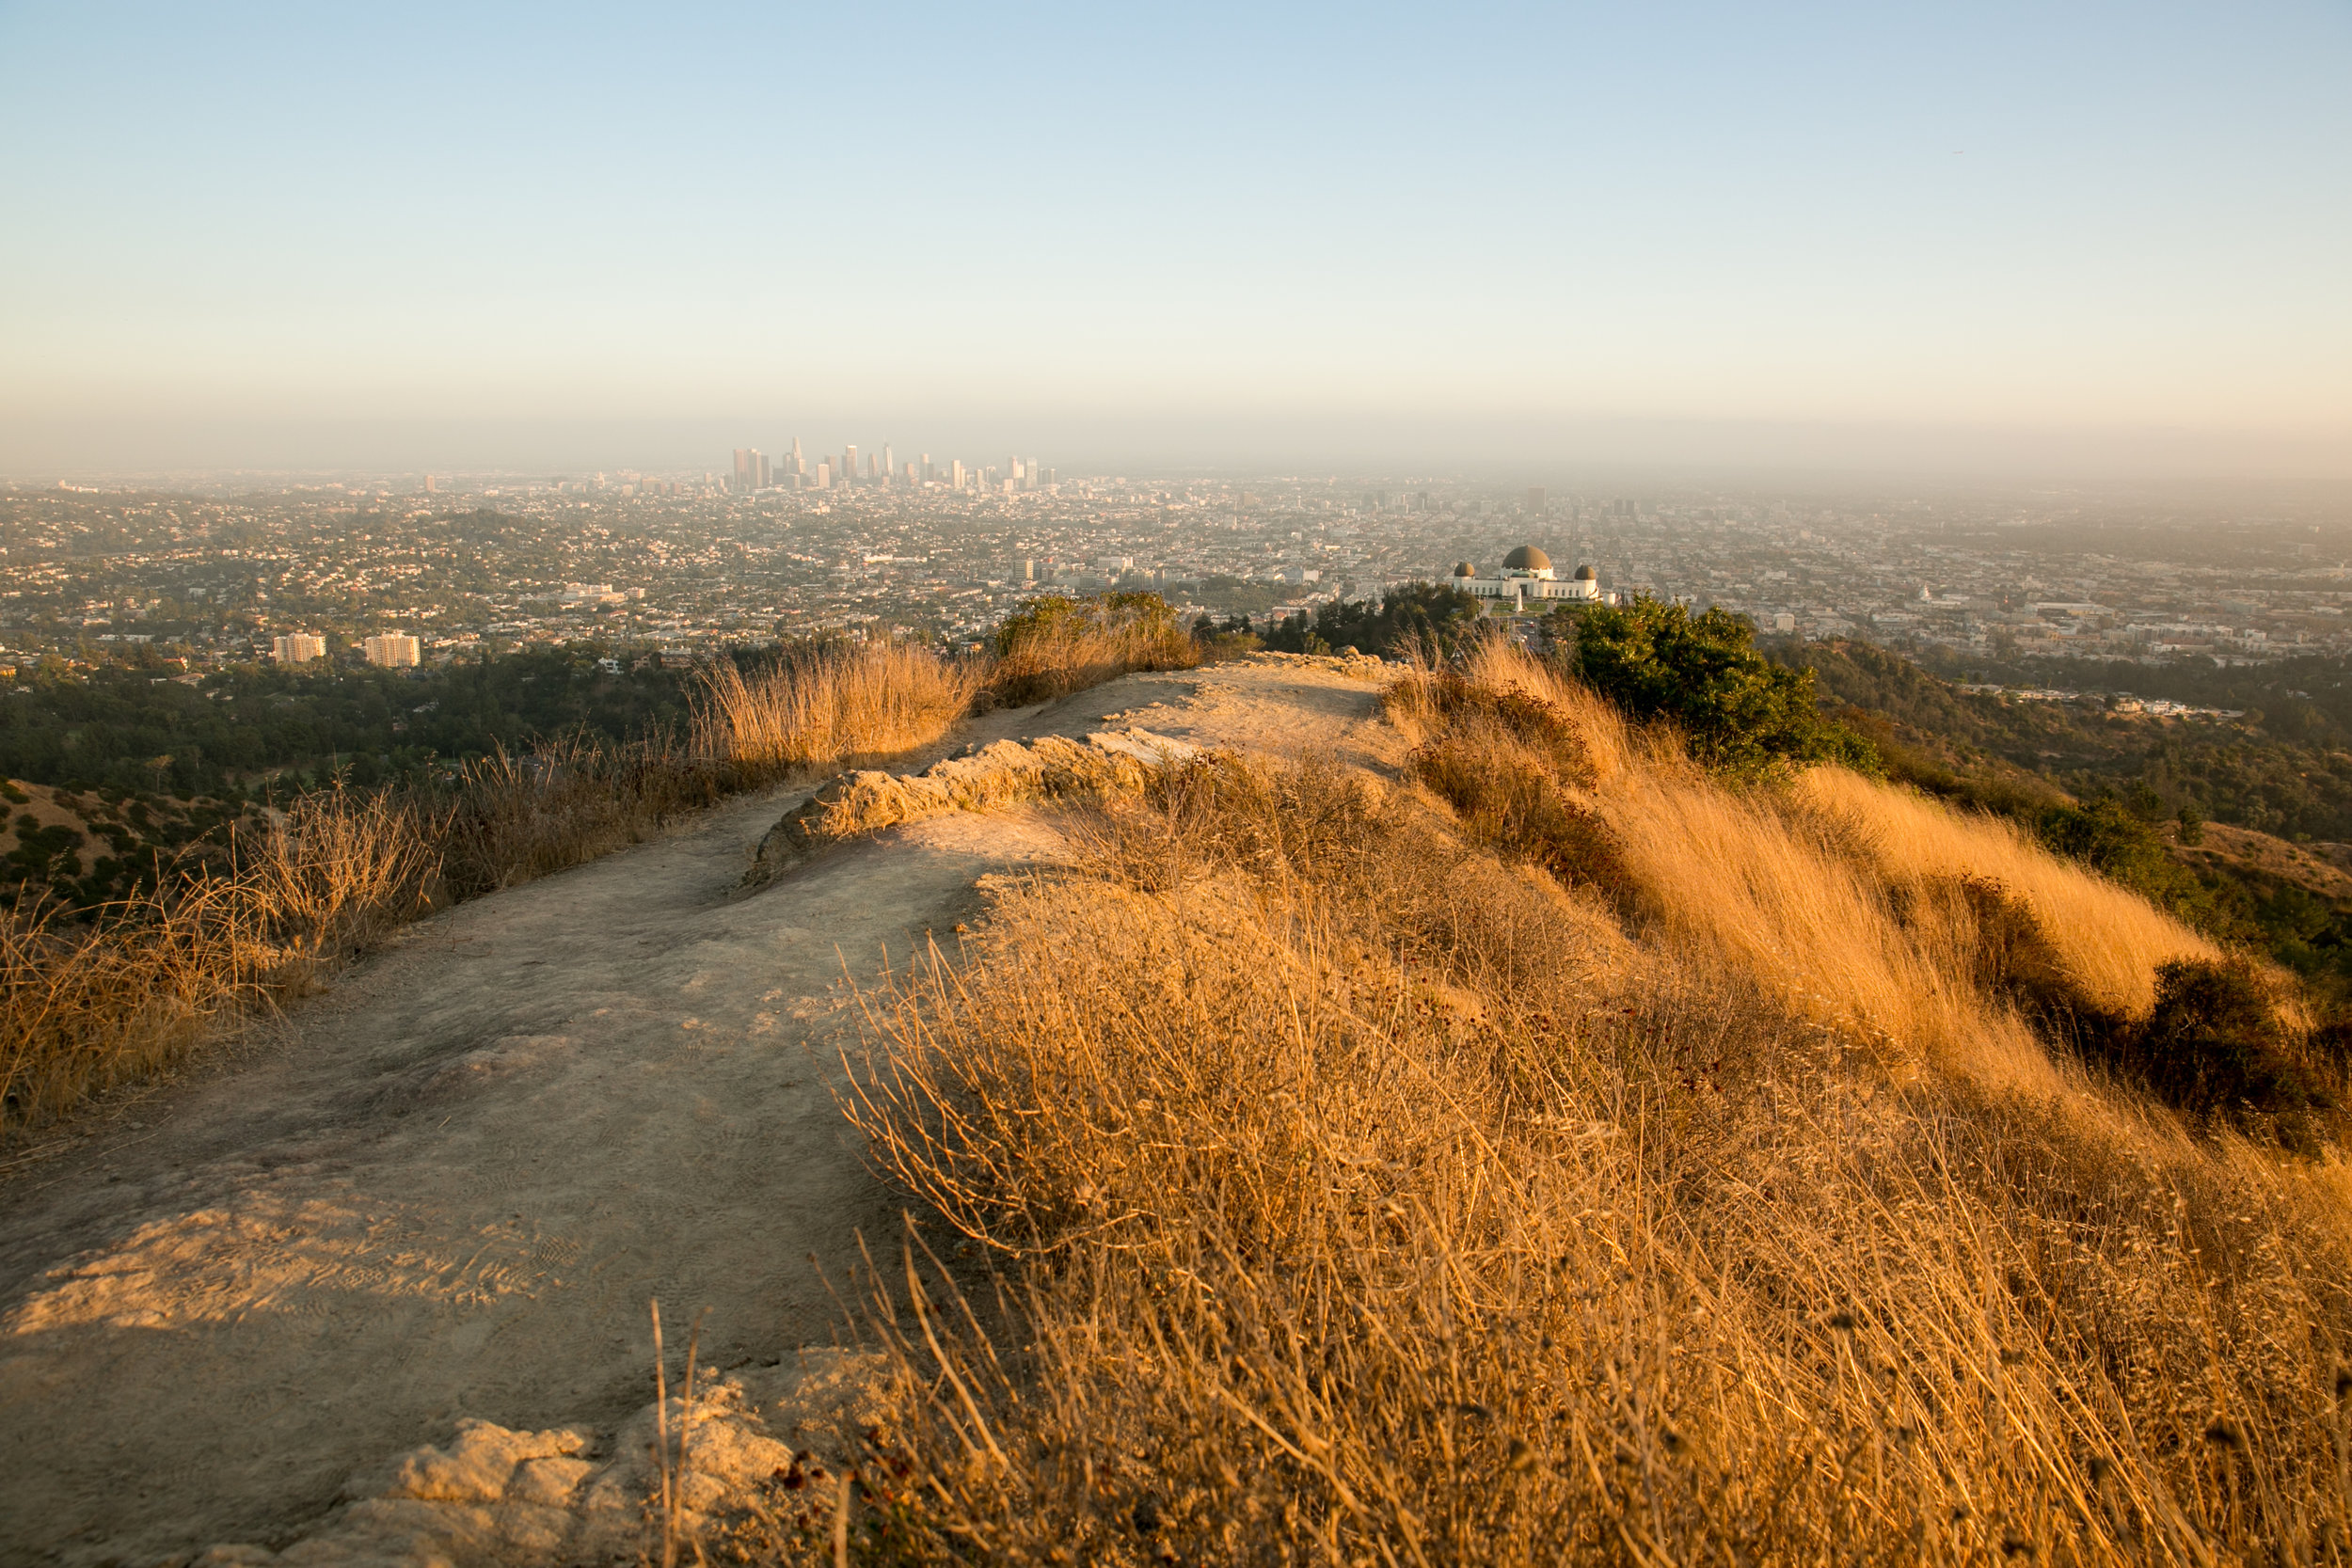 27-2019-proposal-griffith-park-observatory.jpg